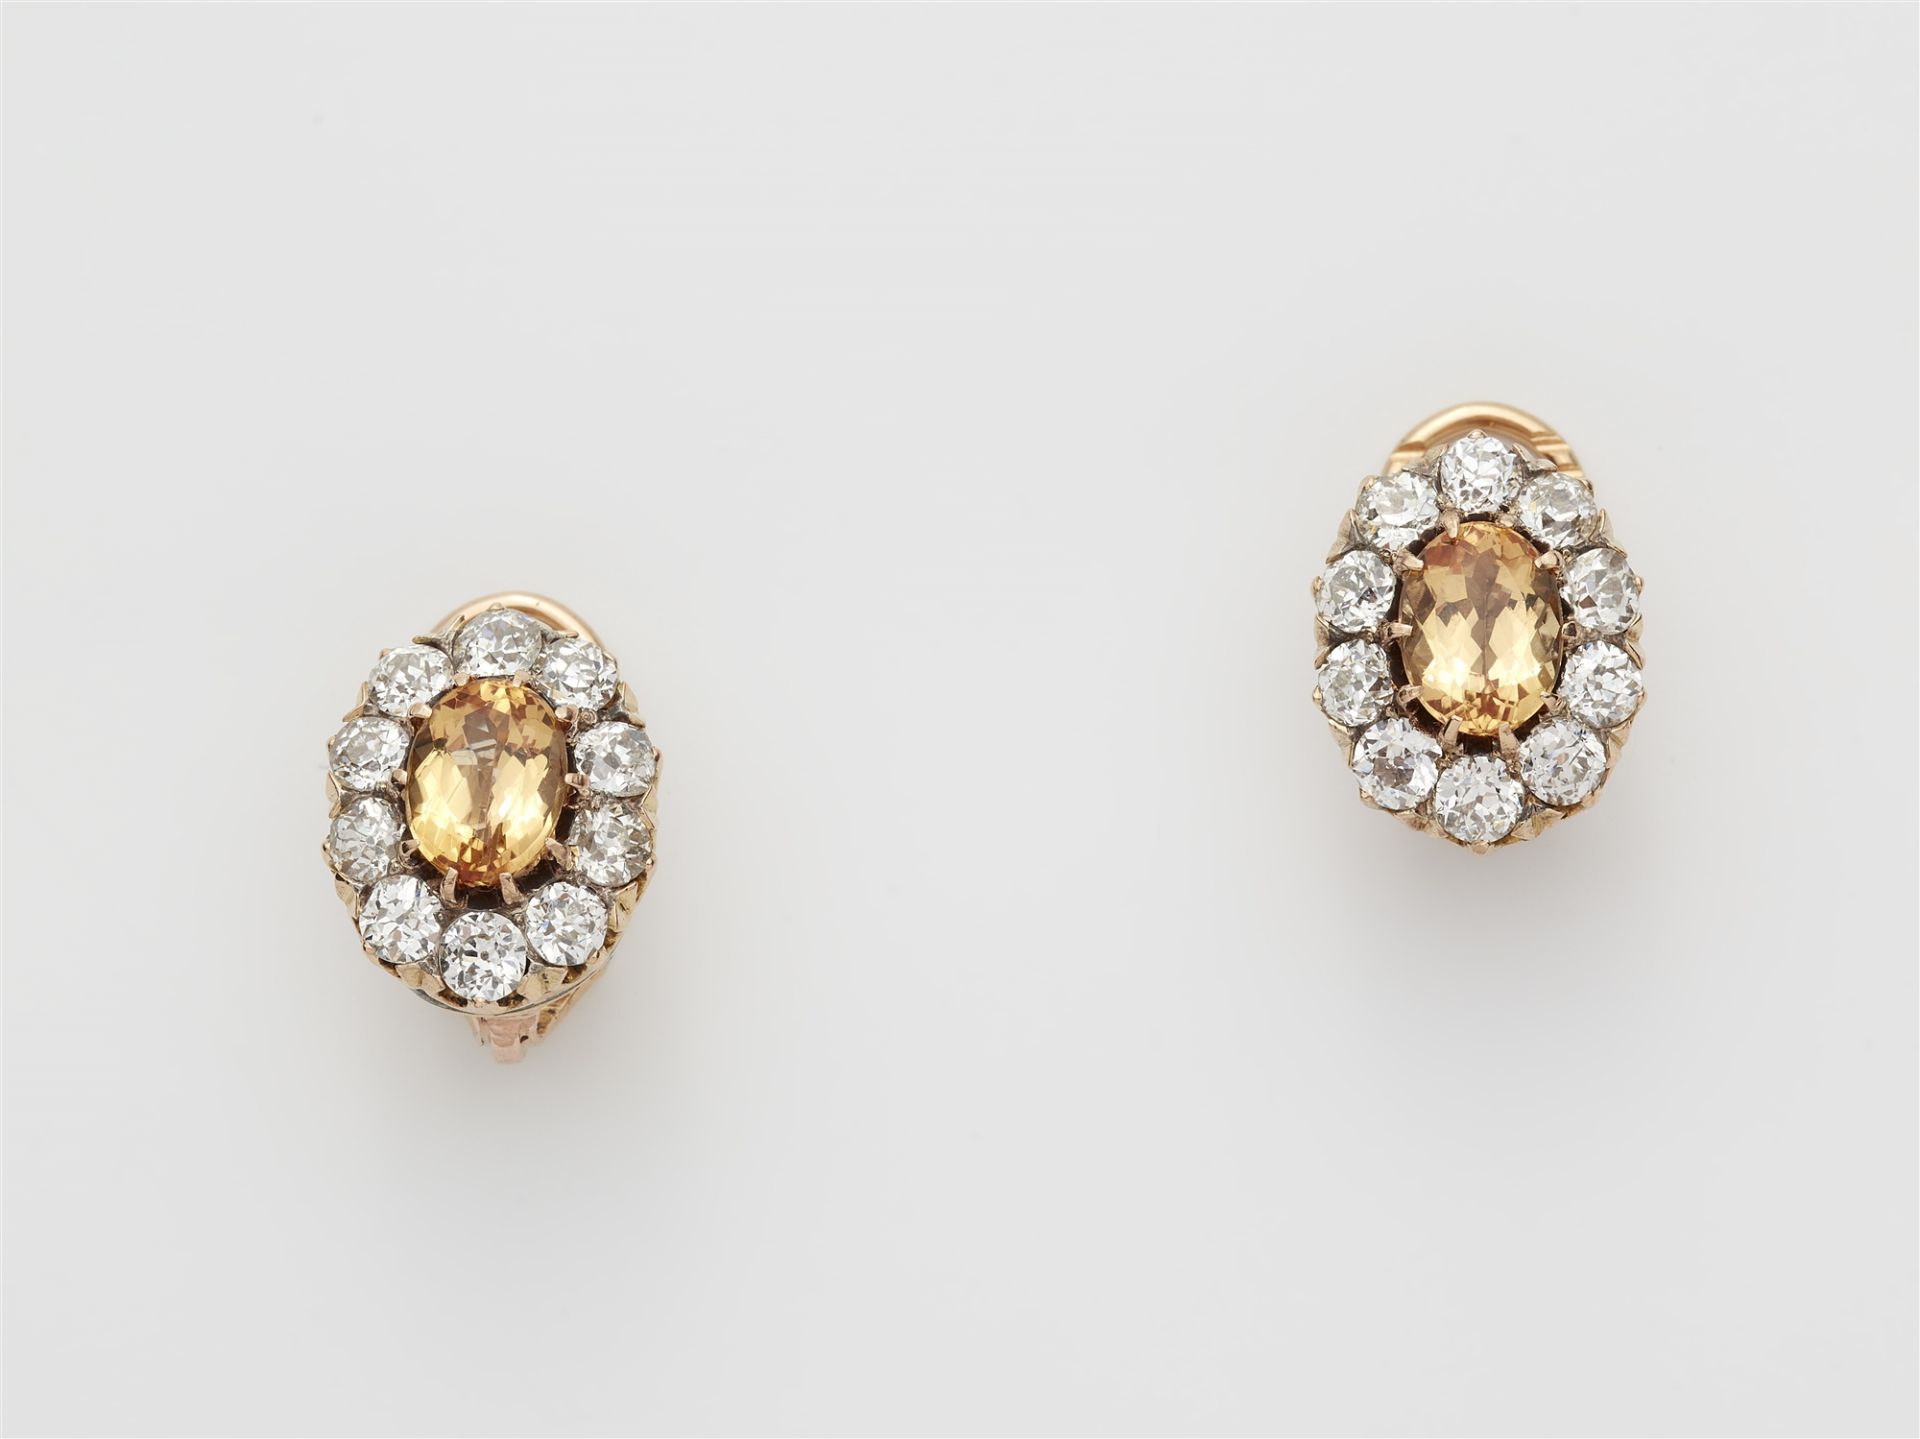 A pair of 18k gold Belle Epoque yellow topaz and diamond earrings.